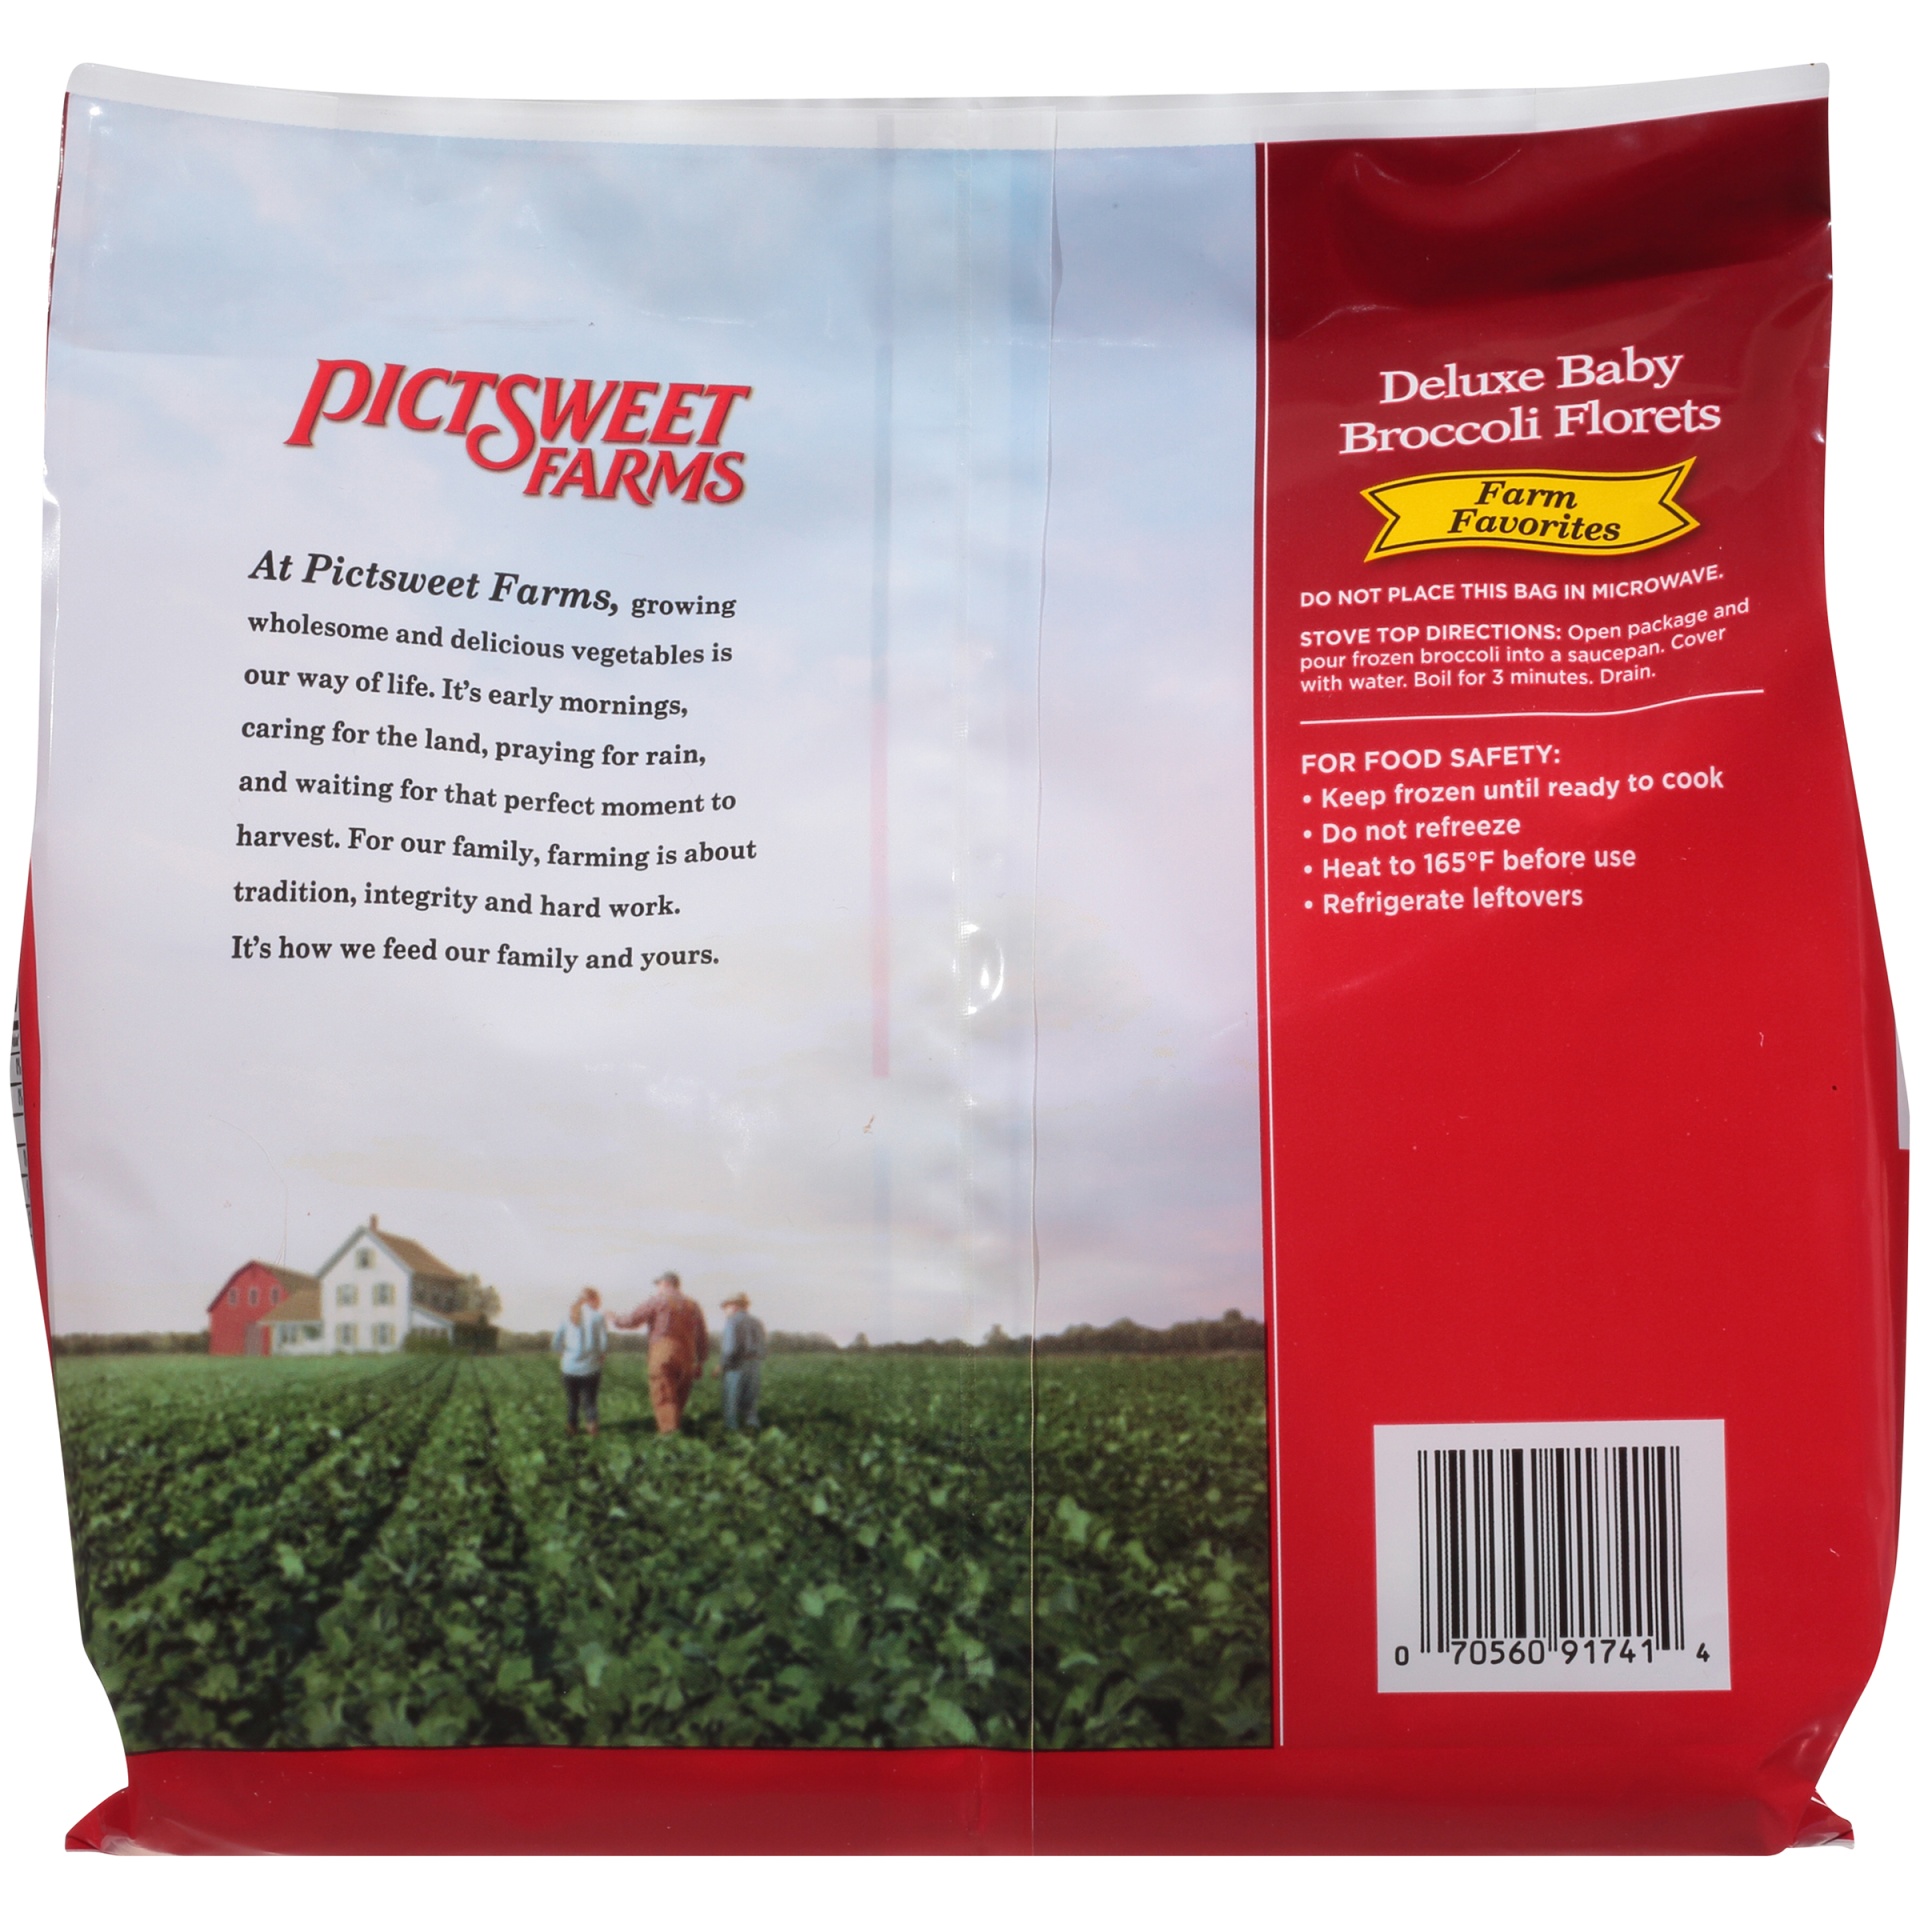 slide 6 of 8, PictSweet Family Size Baby Broccoli Florets, 20 oz